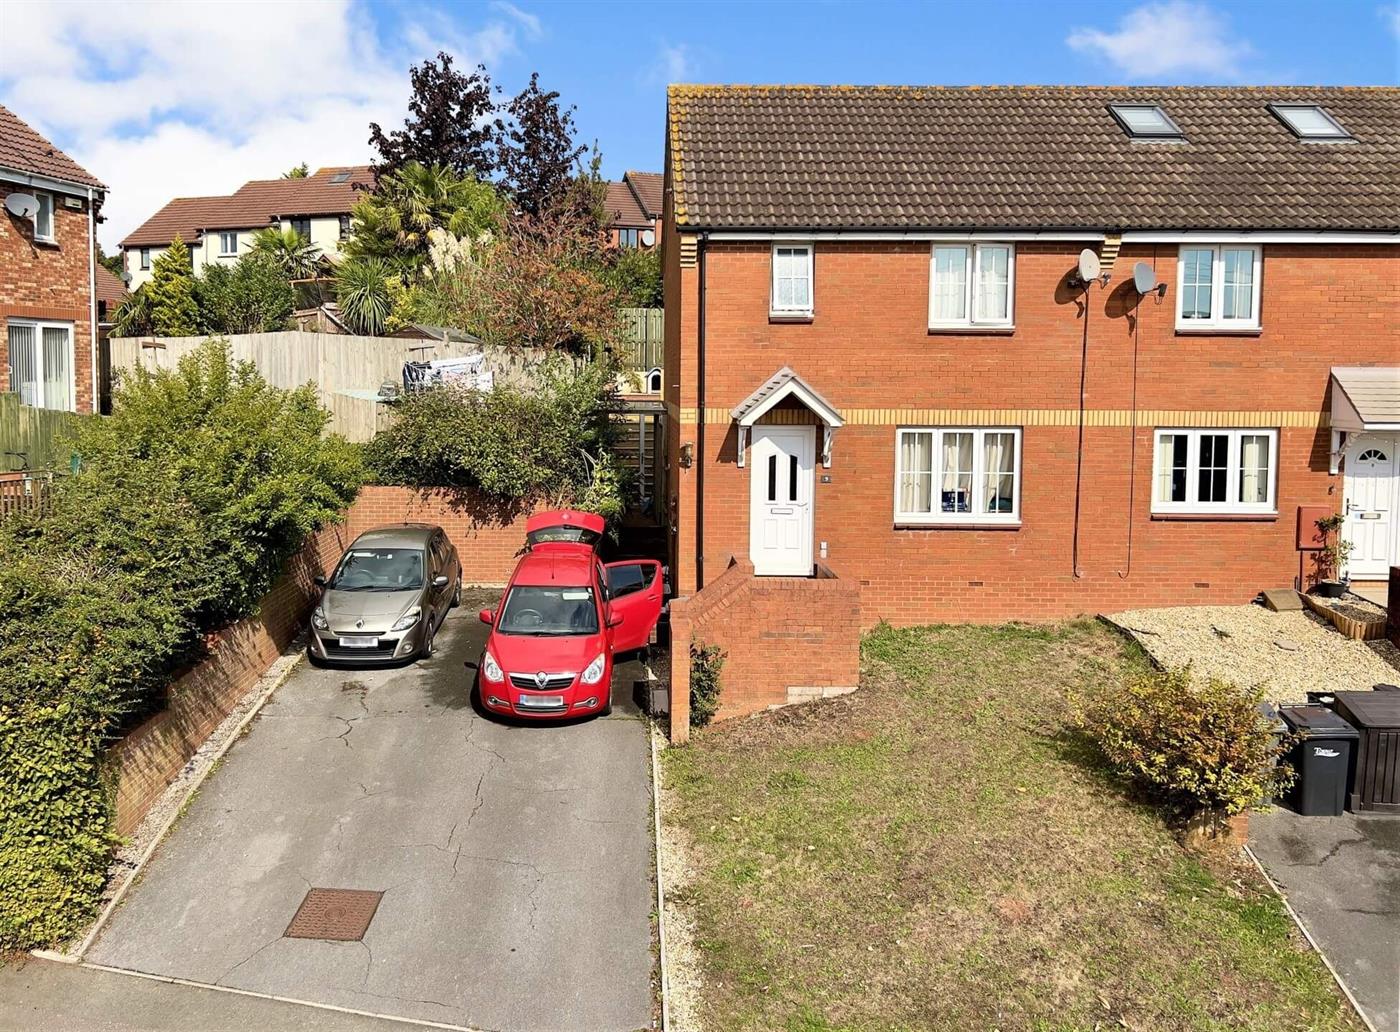 3 Bedroom End of Terrace House to Rent (Let): Kingfisher Close, The Willows, Torquay, TQ2 7TF